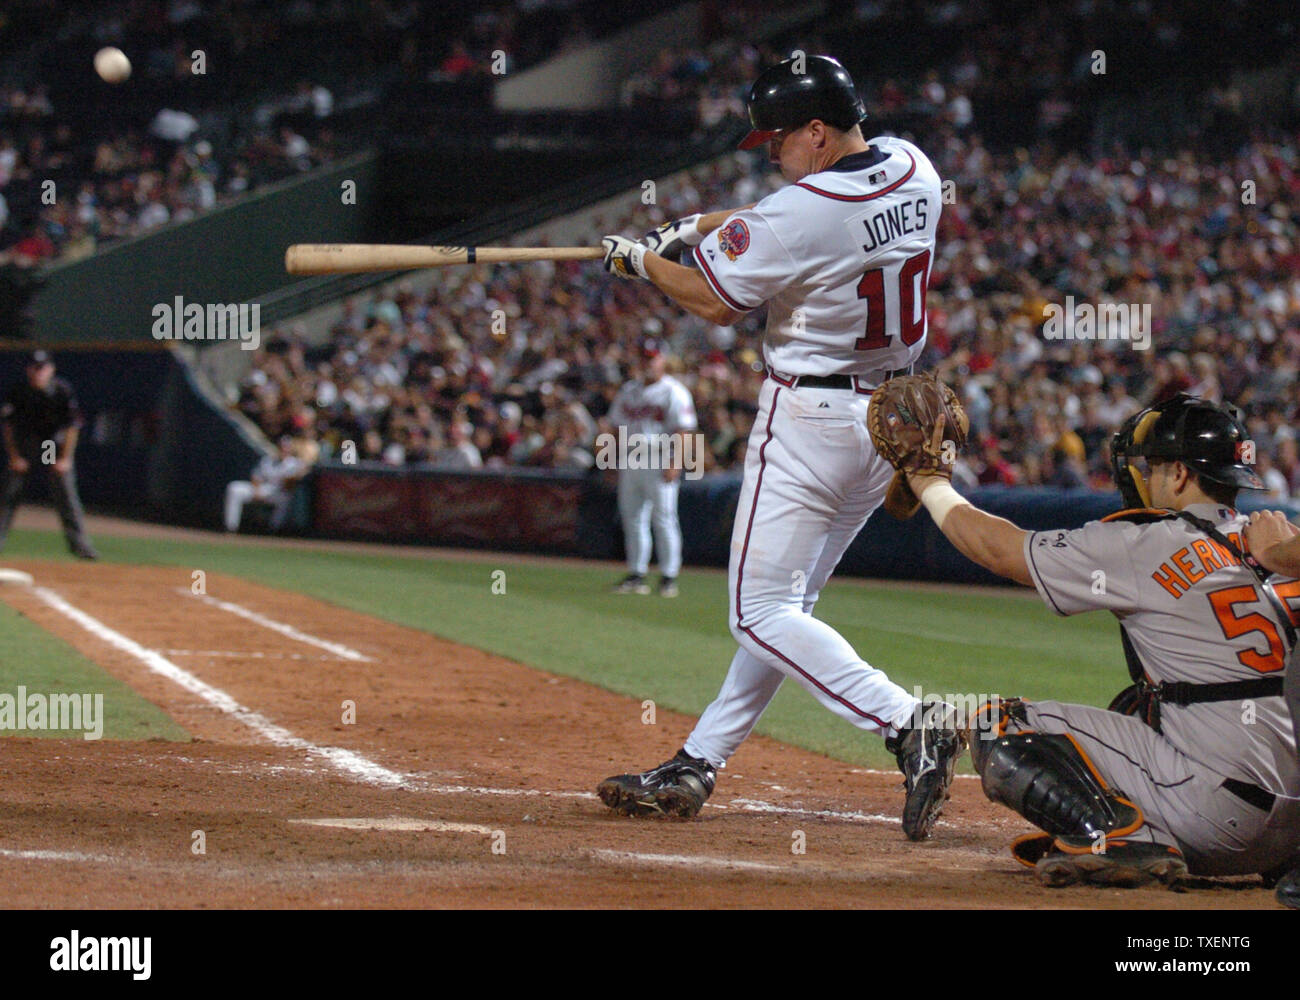 Chipper Jones goes 3-3 in 2000 All-Star game (July 11, 2000)